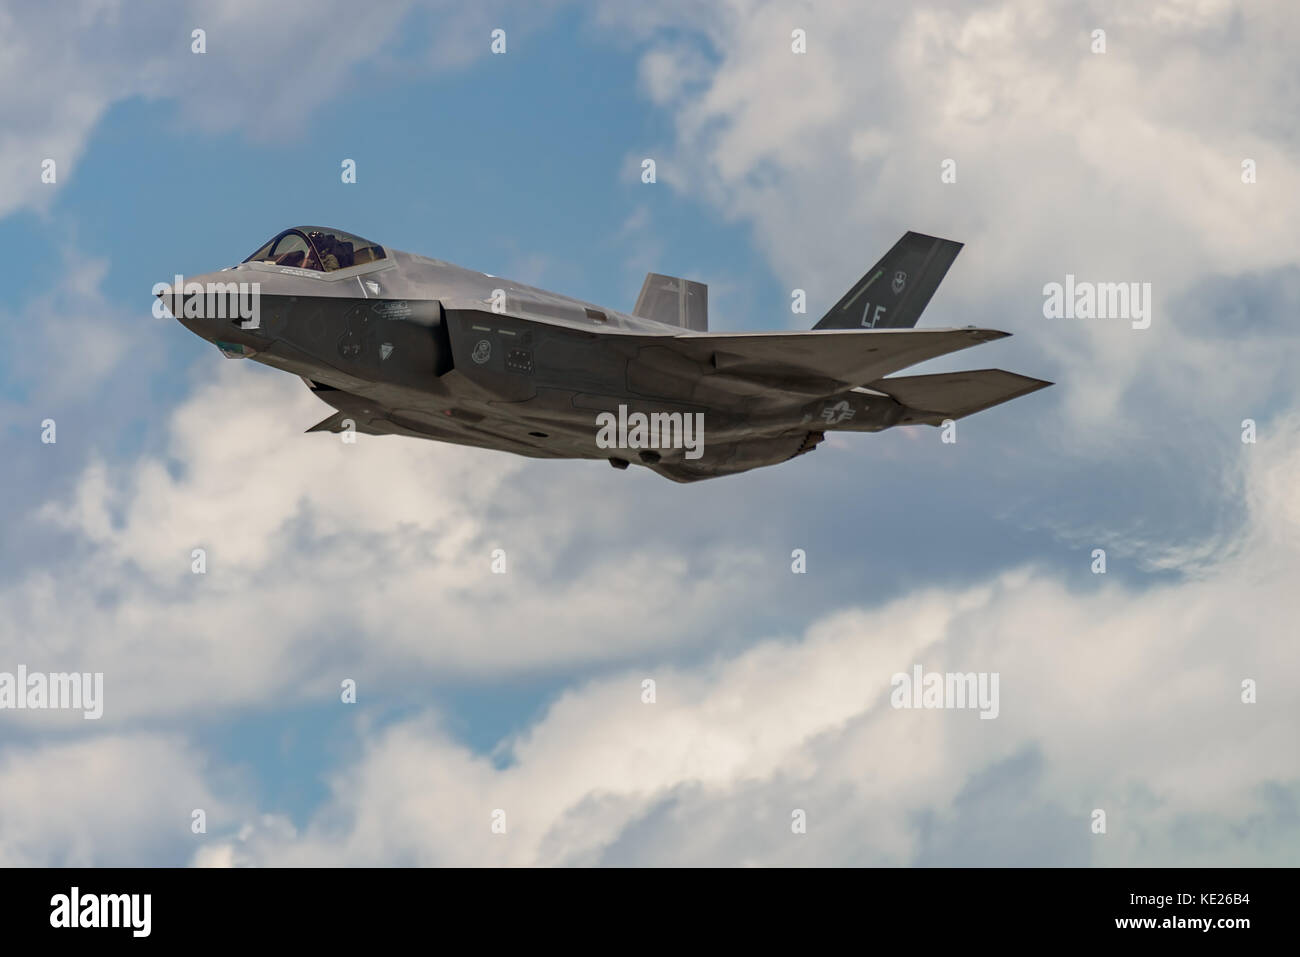 NEW WINDSOR, NY - JULY 2, 2017: The Lockheed Martin F-35 Lightning II from Stewart International Airport during the New York Airshow. Stock Photo